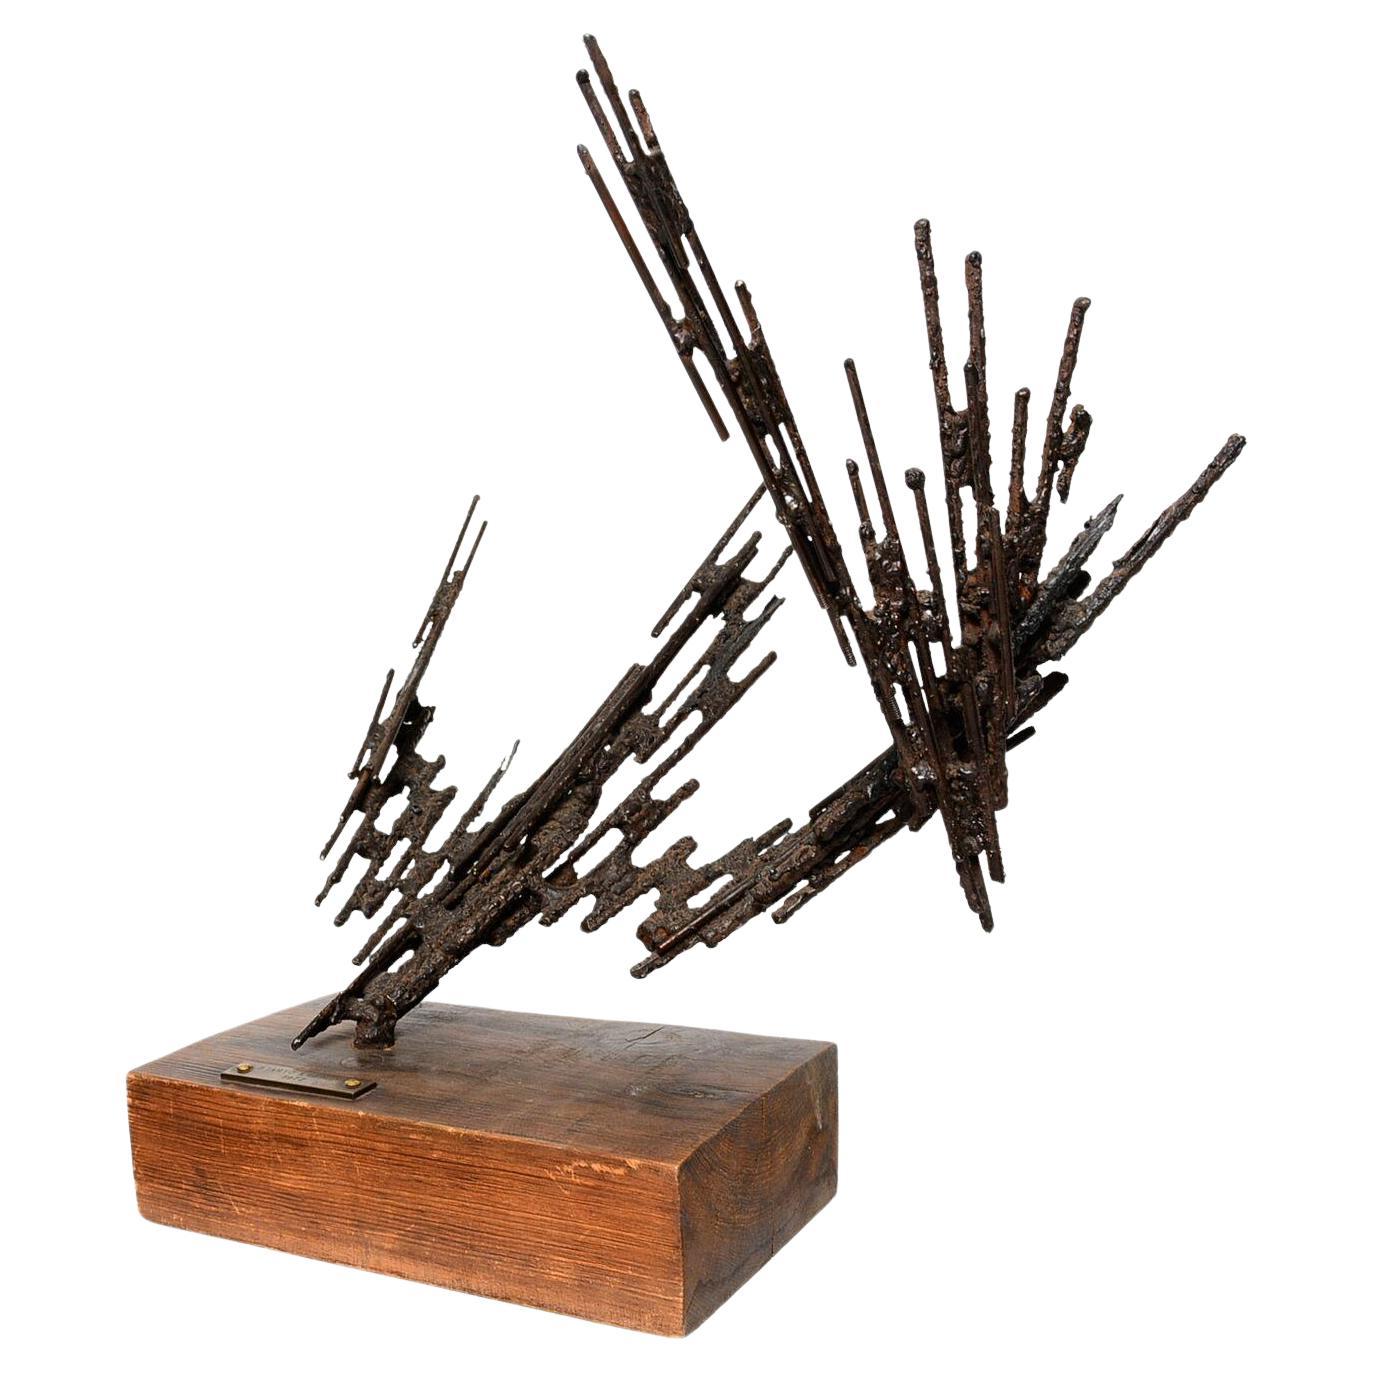 Jorge Stanyo Kaminsky Mexican Modern Abstract Brutalist Iron Sculpture 1977